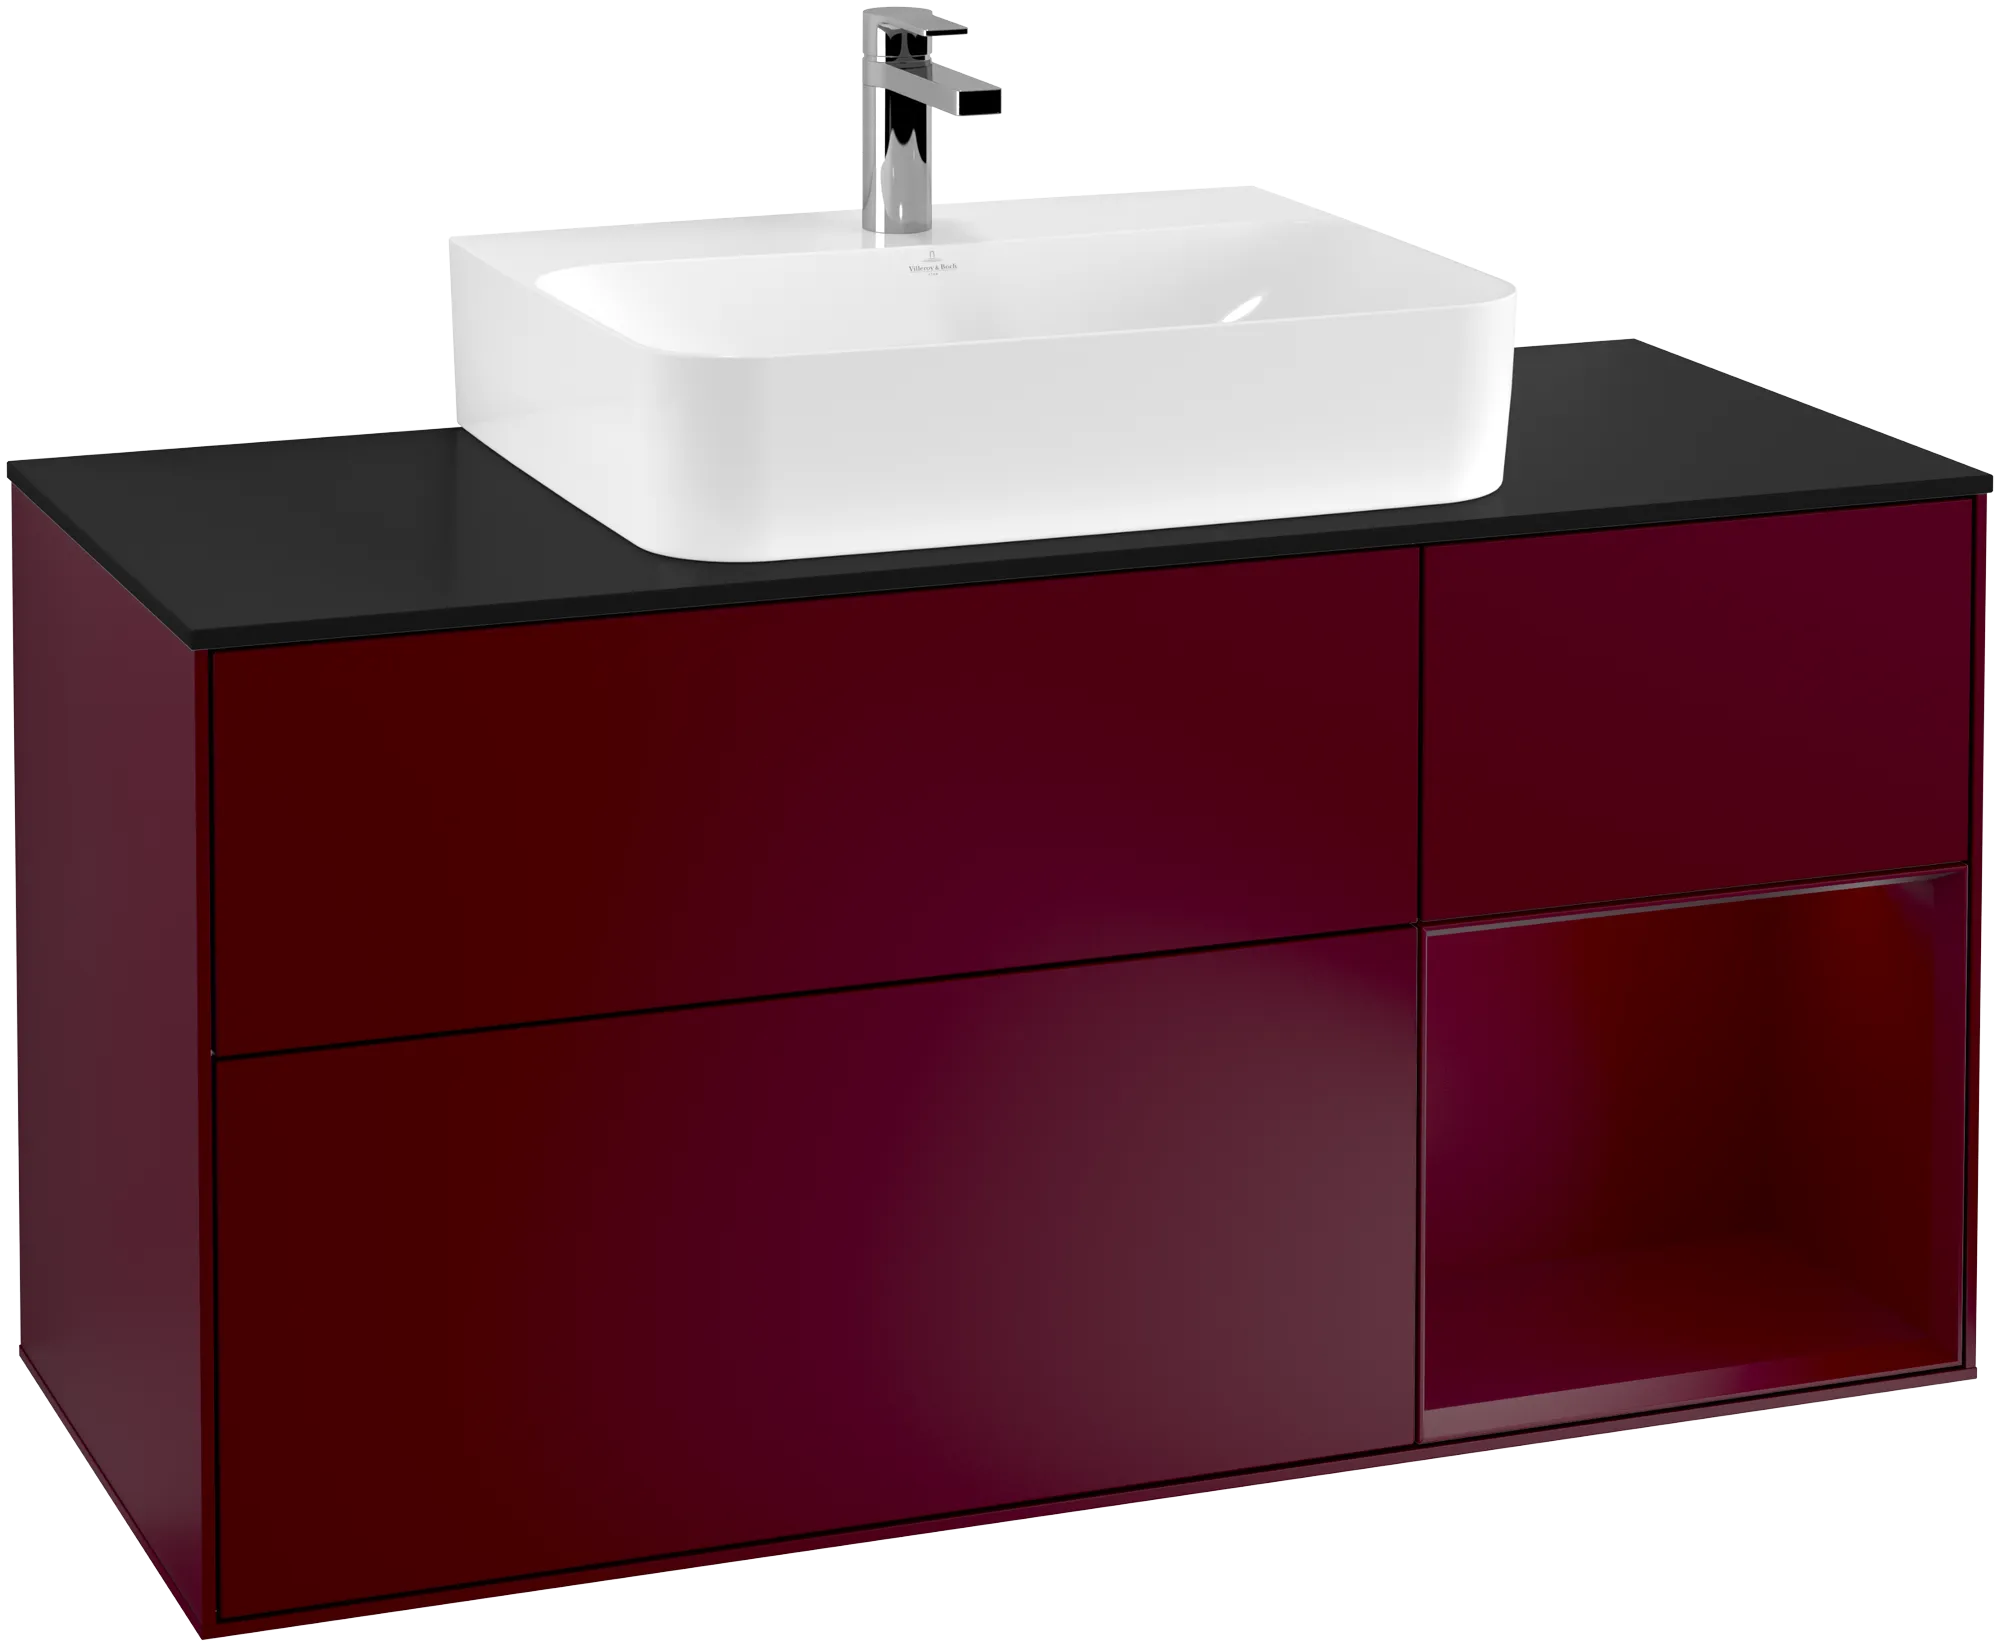 VILLEROY BOCH Finion Vanity unit, with lighting, 3 pull-out compartments, 1200 x 603 x 501 mm, Peony Matt Lacquer / Peony Matt Lacquer / Glass Black Matt #G172HBHB resmi